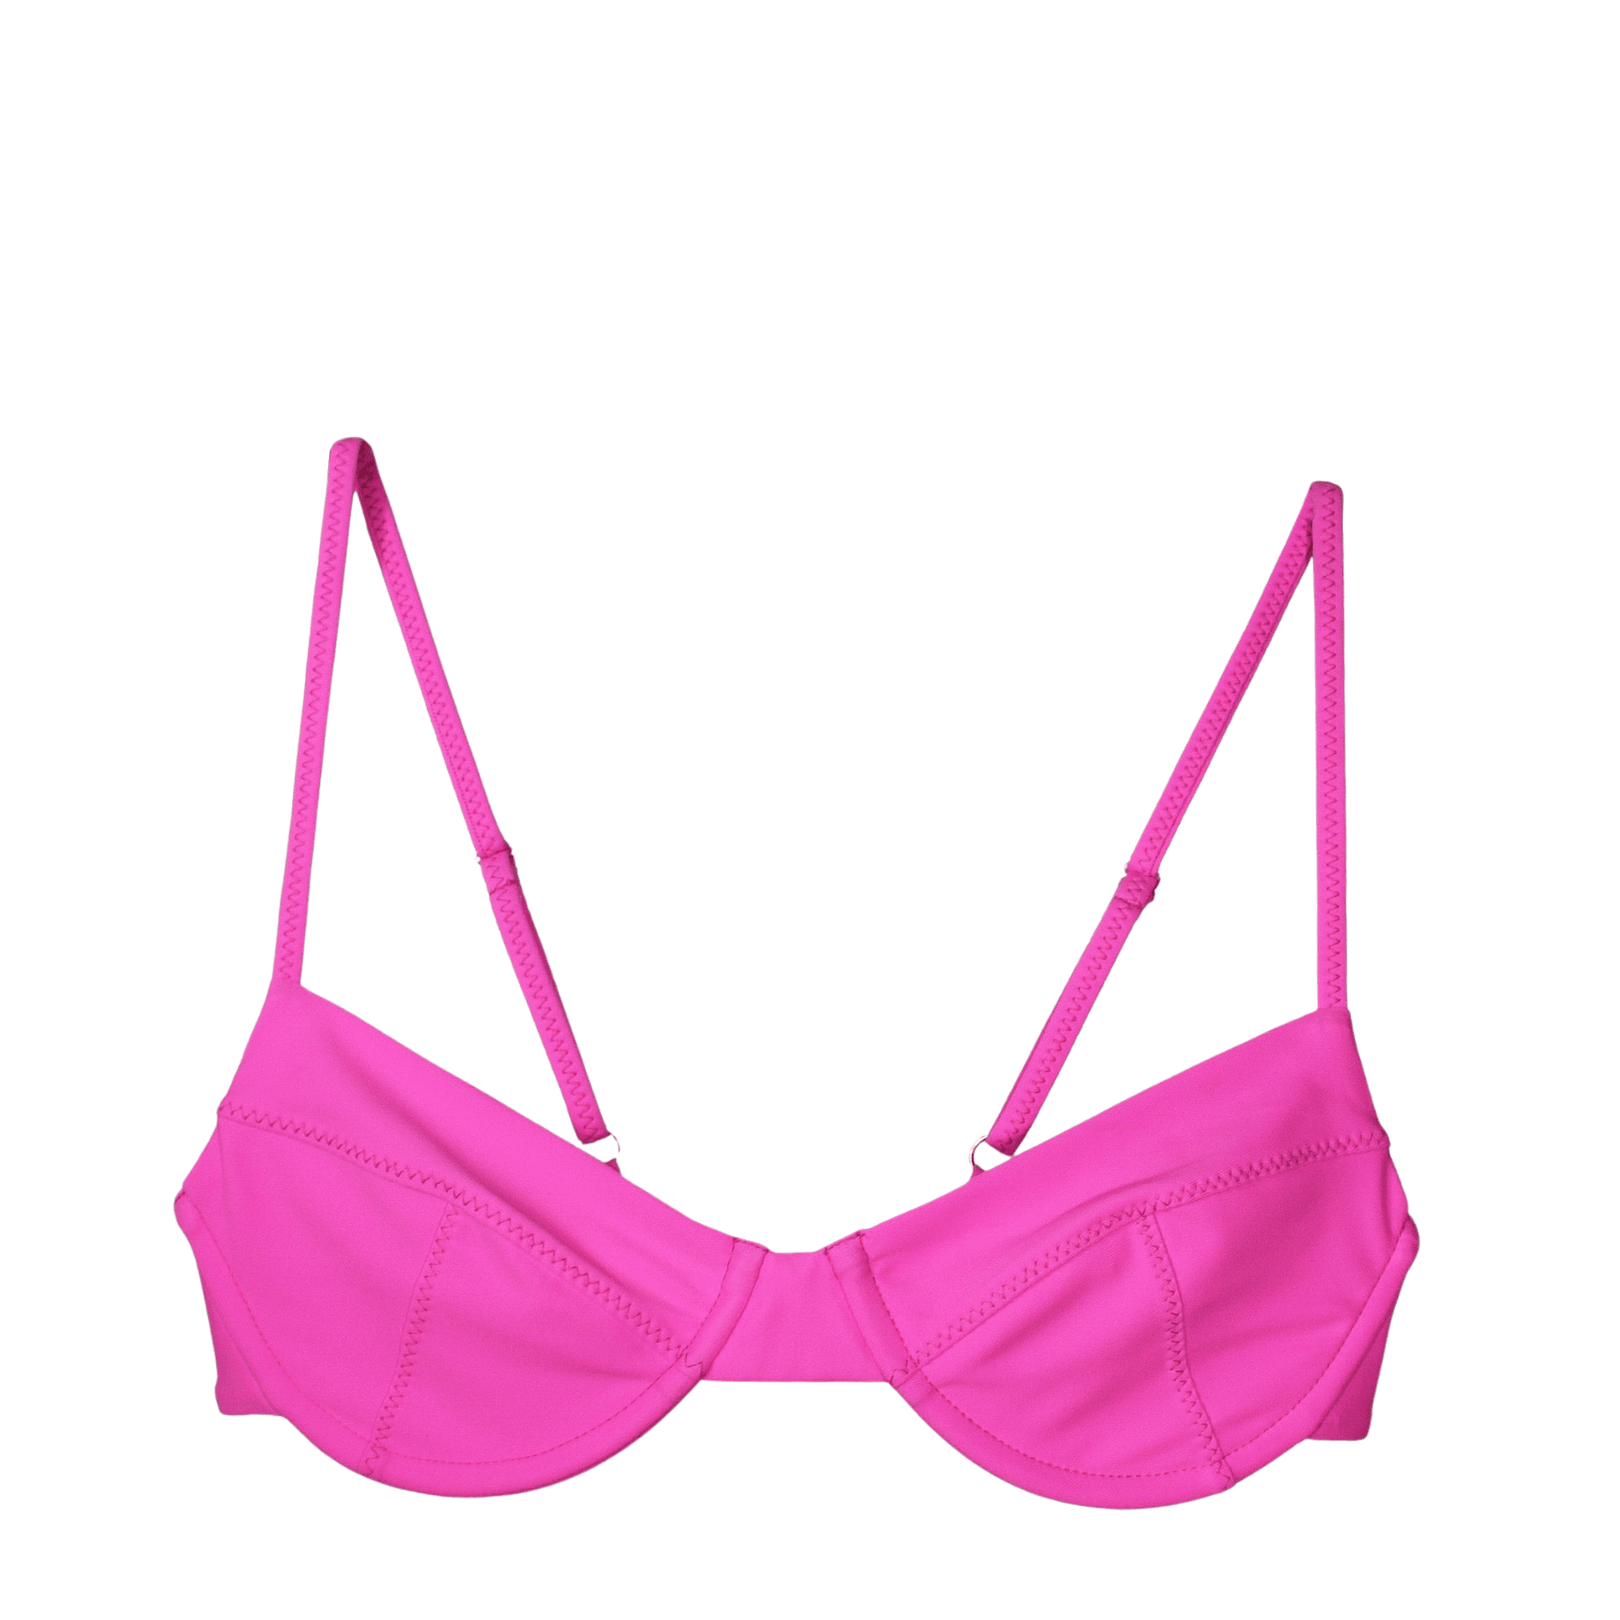 Hot pink underwire bikini top with adjustable straps